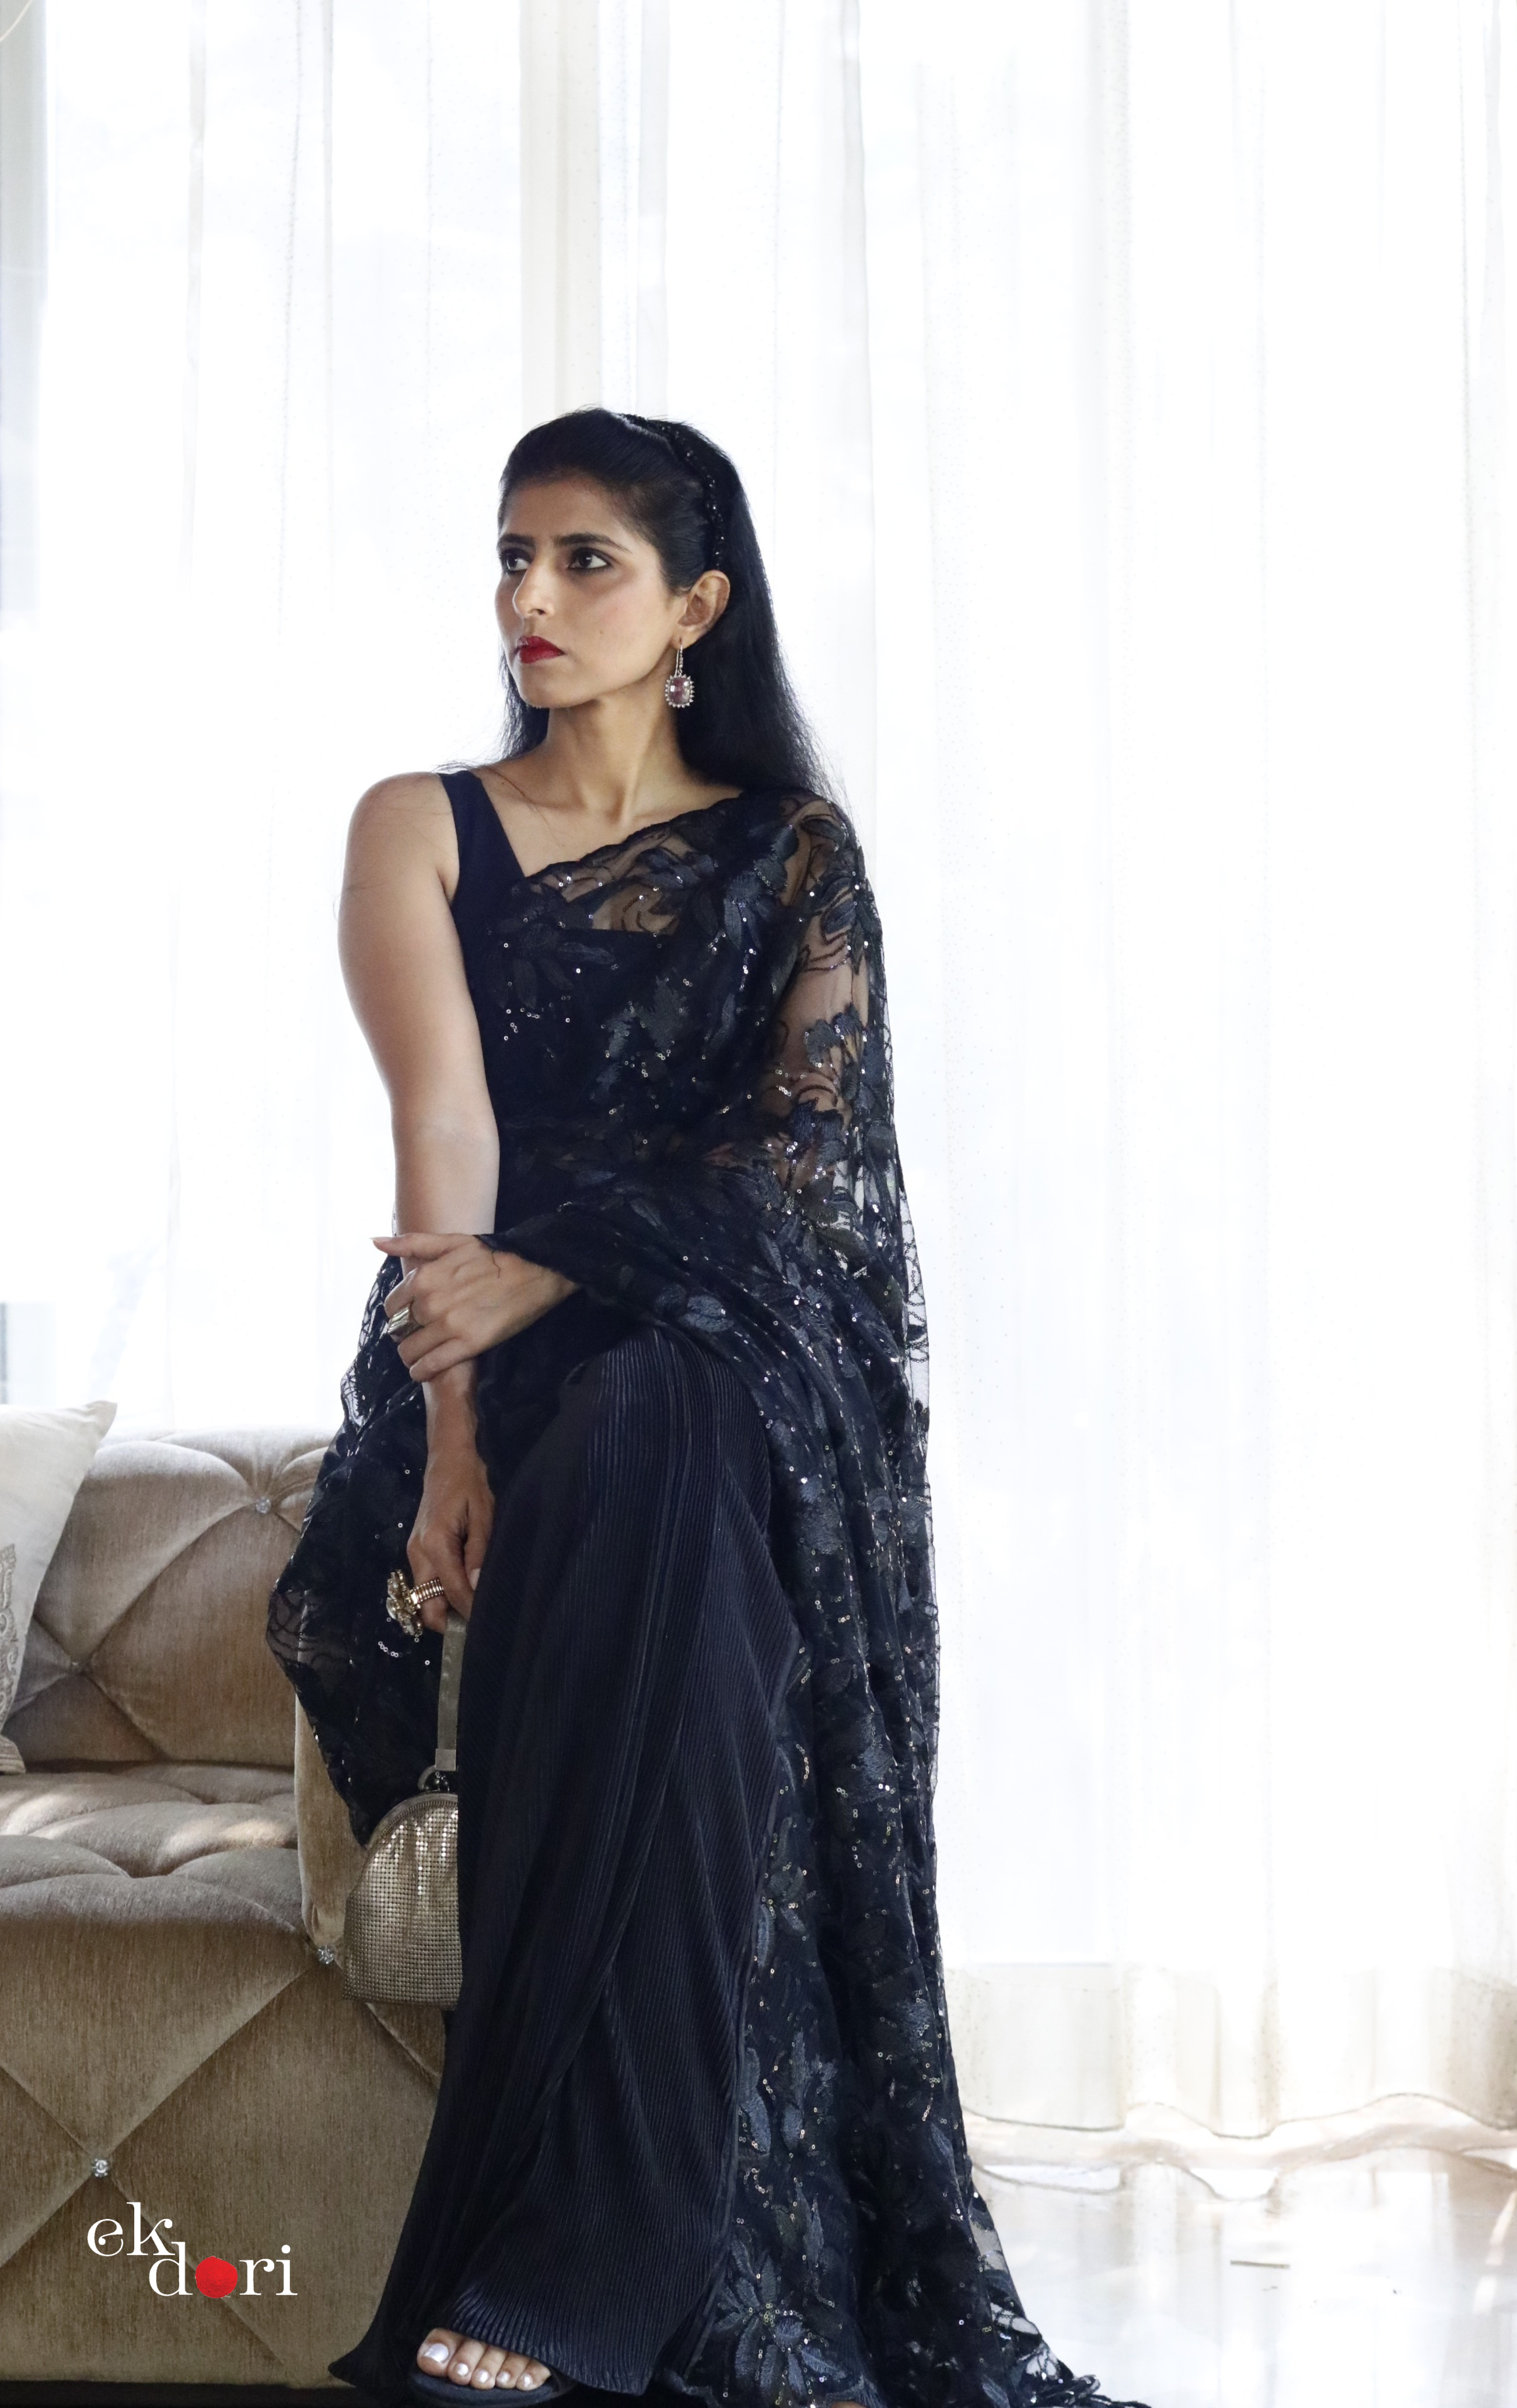 Enthralling Black Sequined Work Georgette Cocktail Party Saree With Blouse  | Party sarees, Cocktail party, Sequined